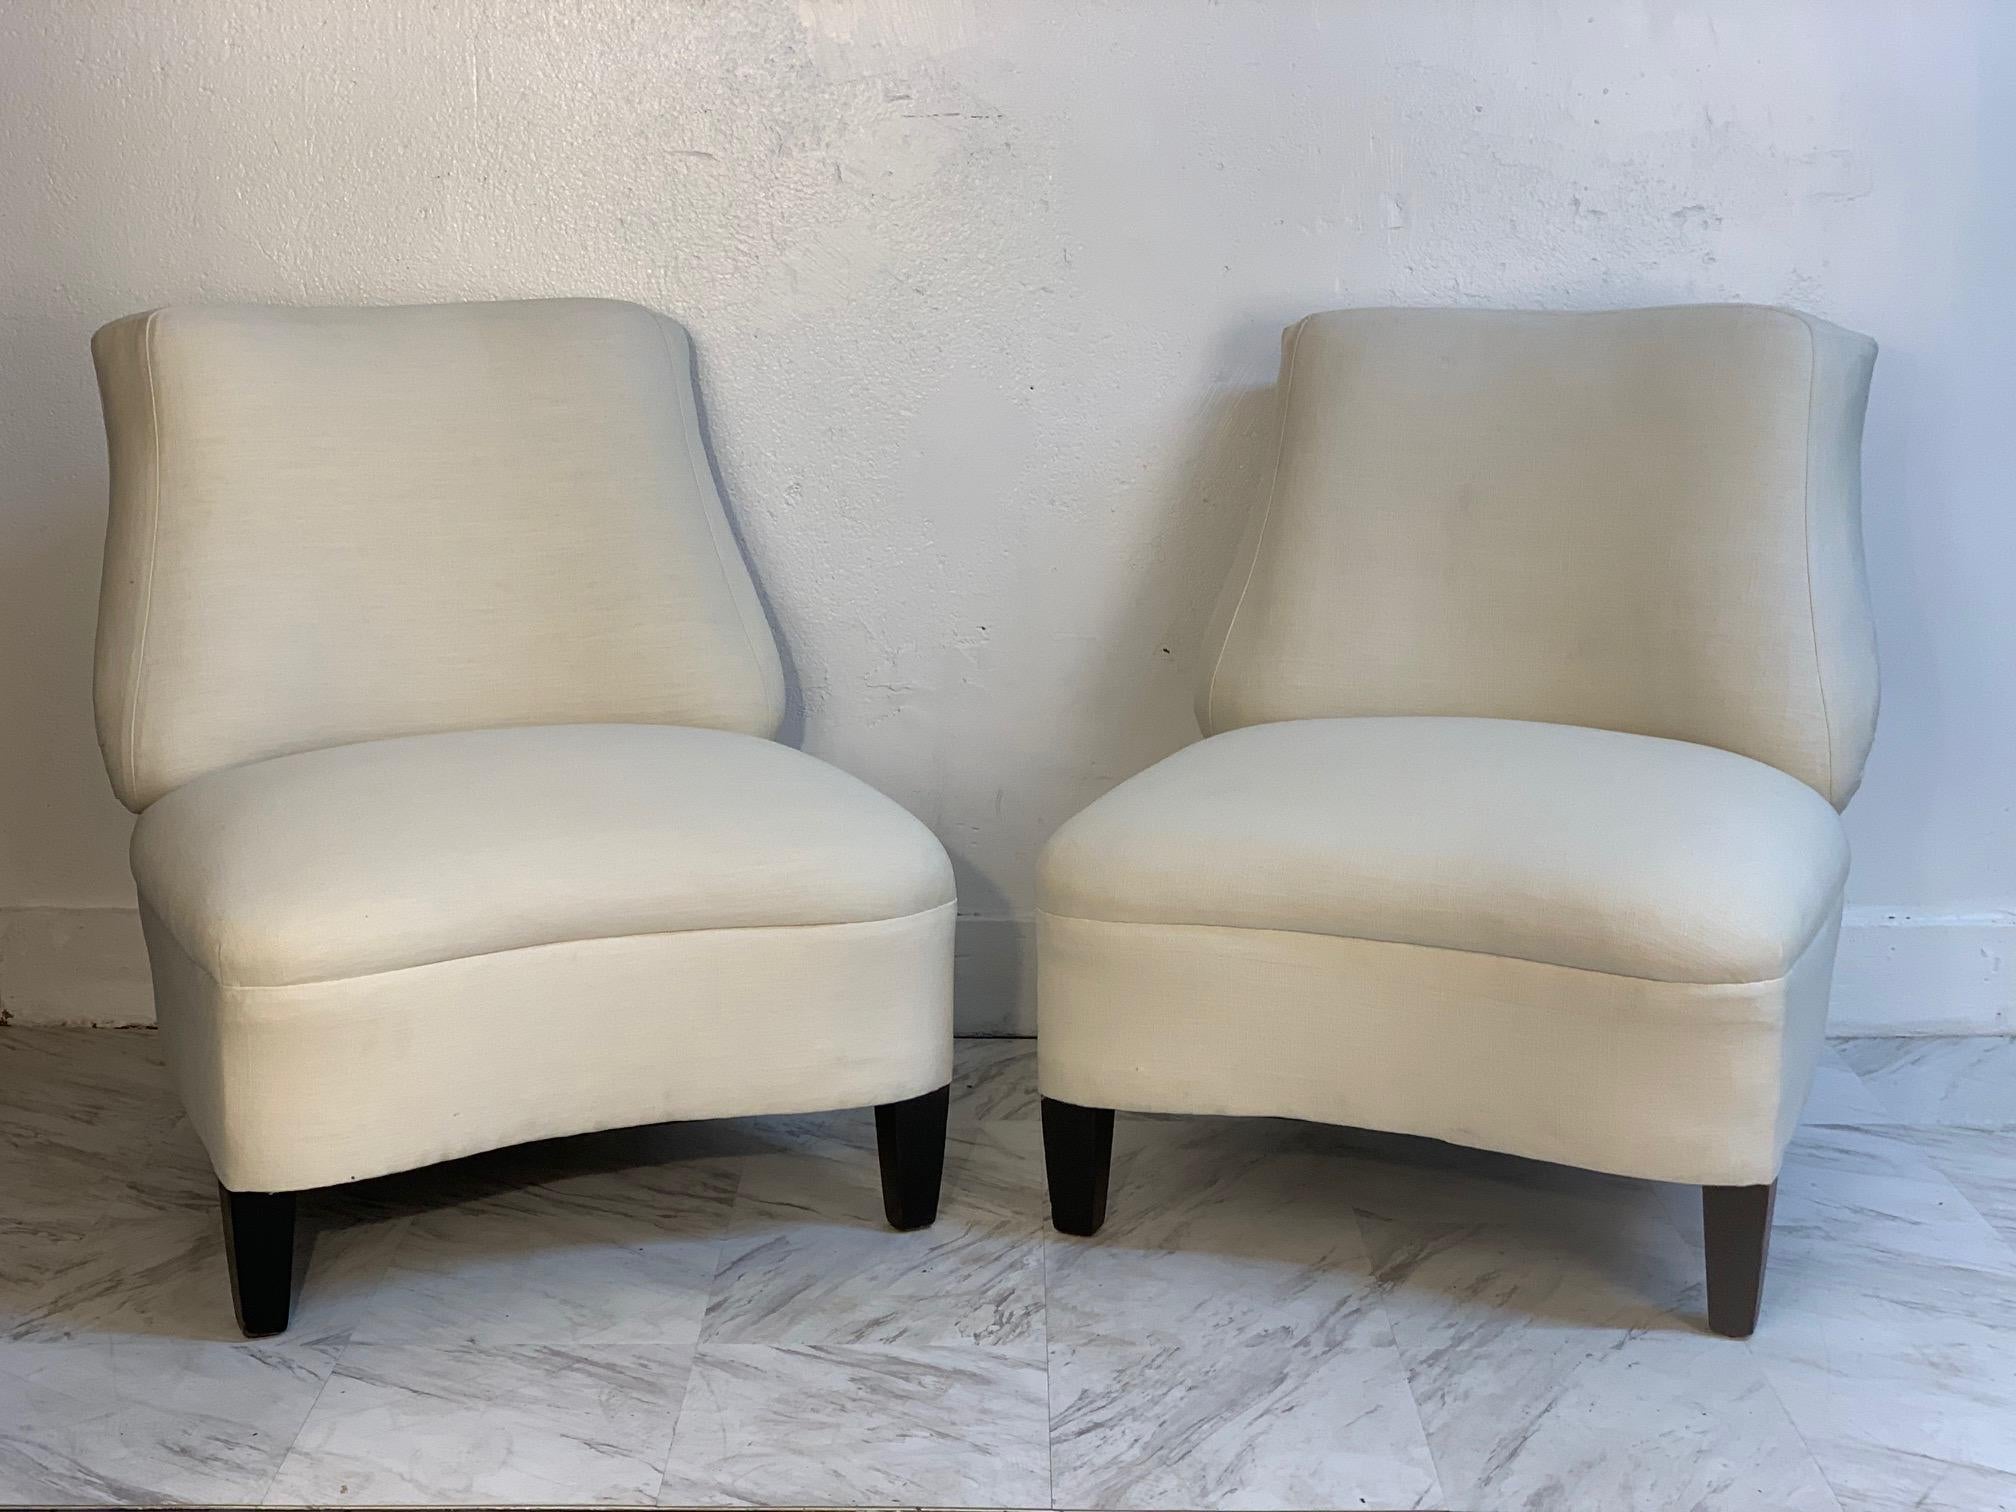 Pair of 1950s lounge or slipper chairs in the manner of Gilbert Rohde. Off-white upholstery with black lacquered wood legs. Dunbar style.